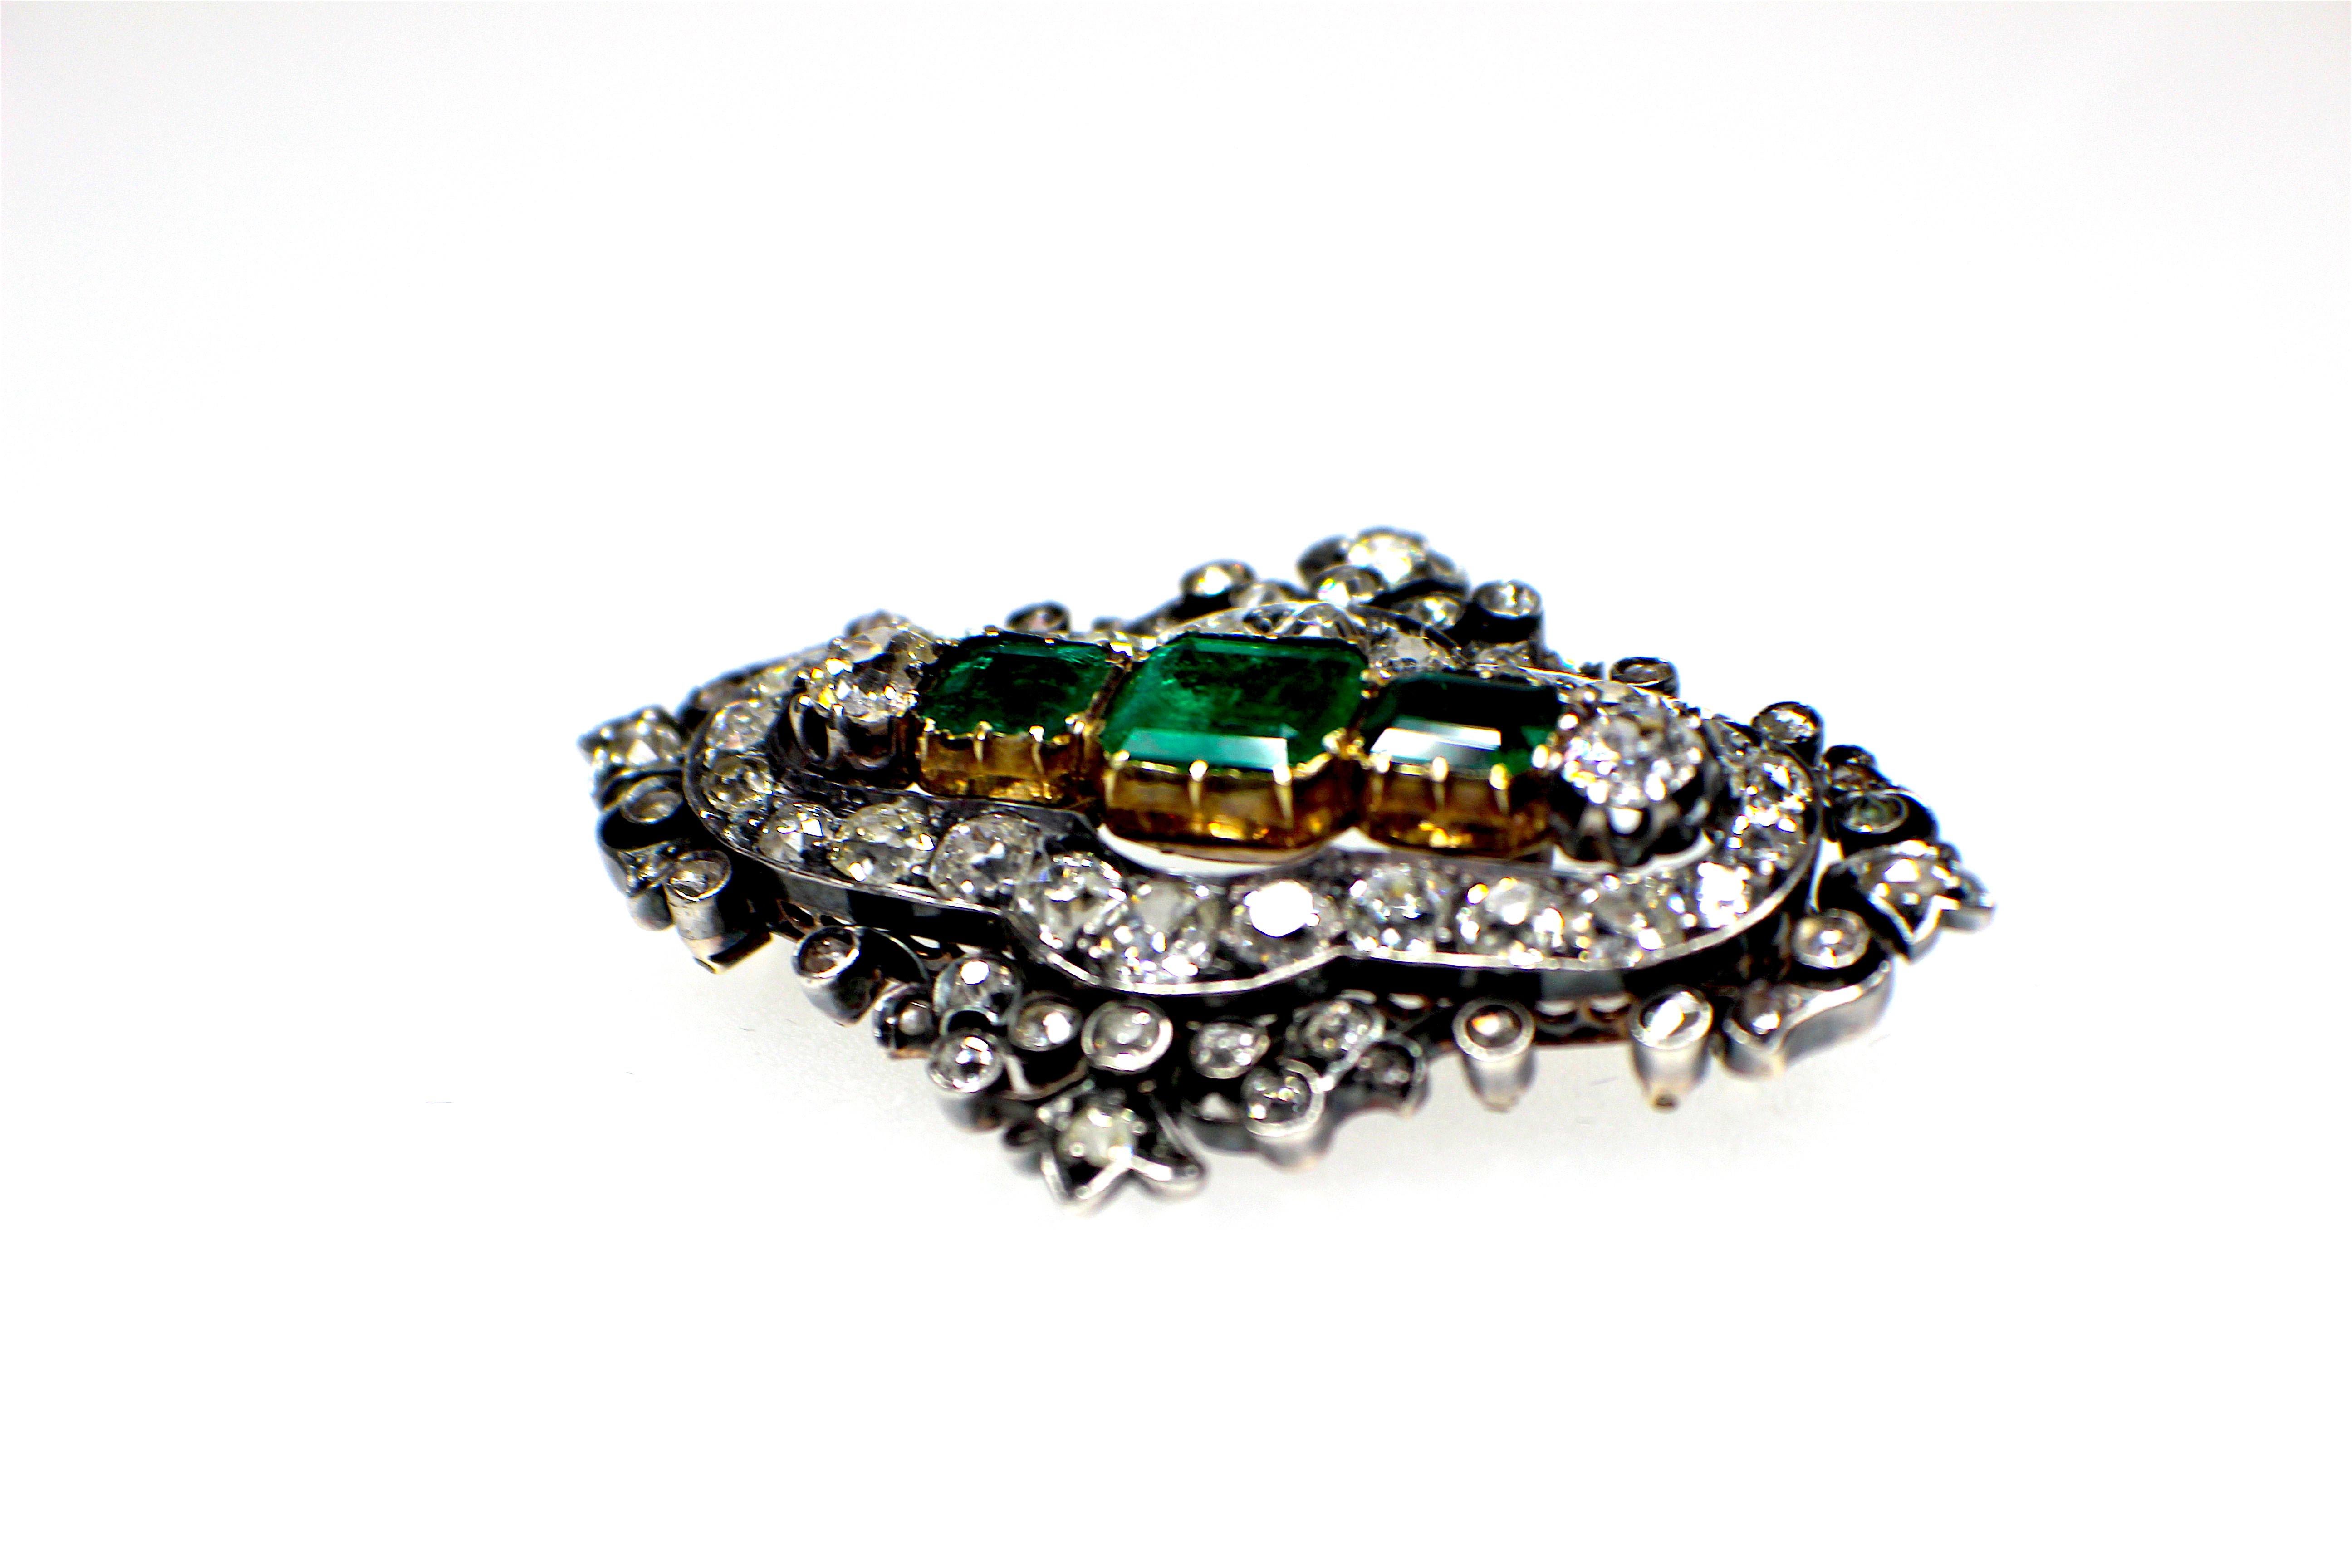 GEMOLITHOS Antique emerald and diamond brooch,  emerlads are of clombian origin, mounted in silver and gold, circa 1840´s 